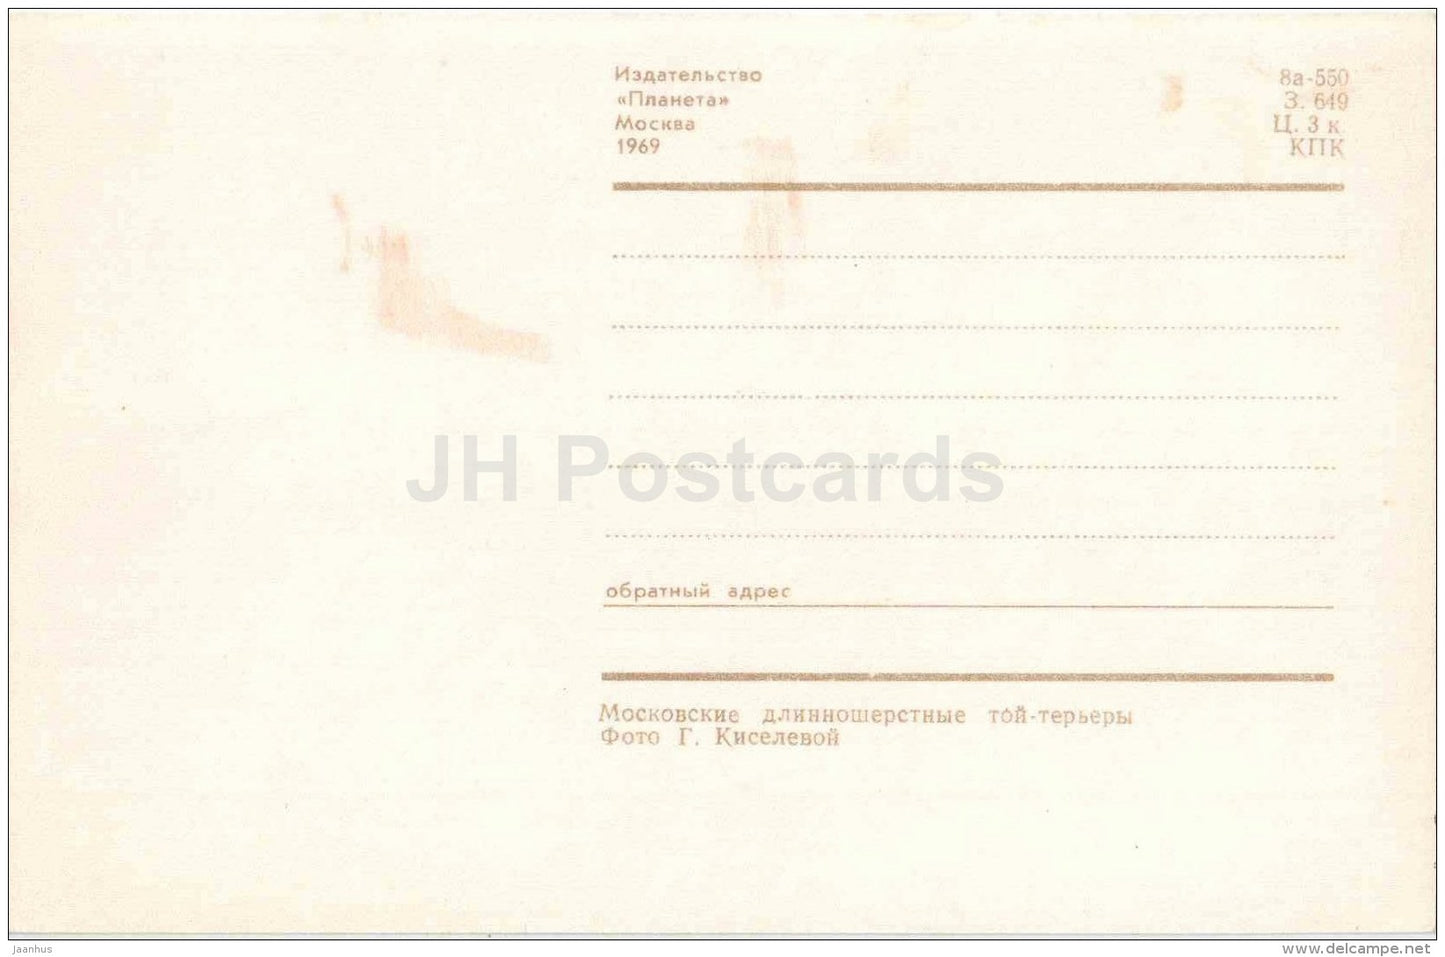 Moscow Longhaired Toy Terrier - dog - 1969 - Russia USSR - unused - JH Postcards